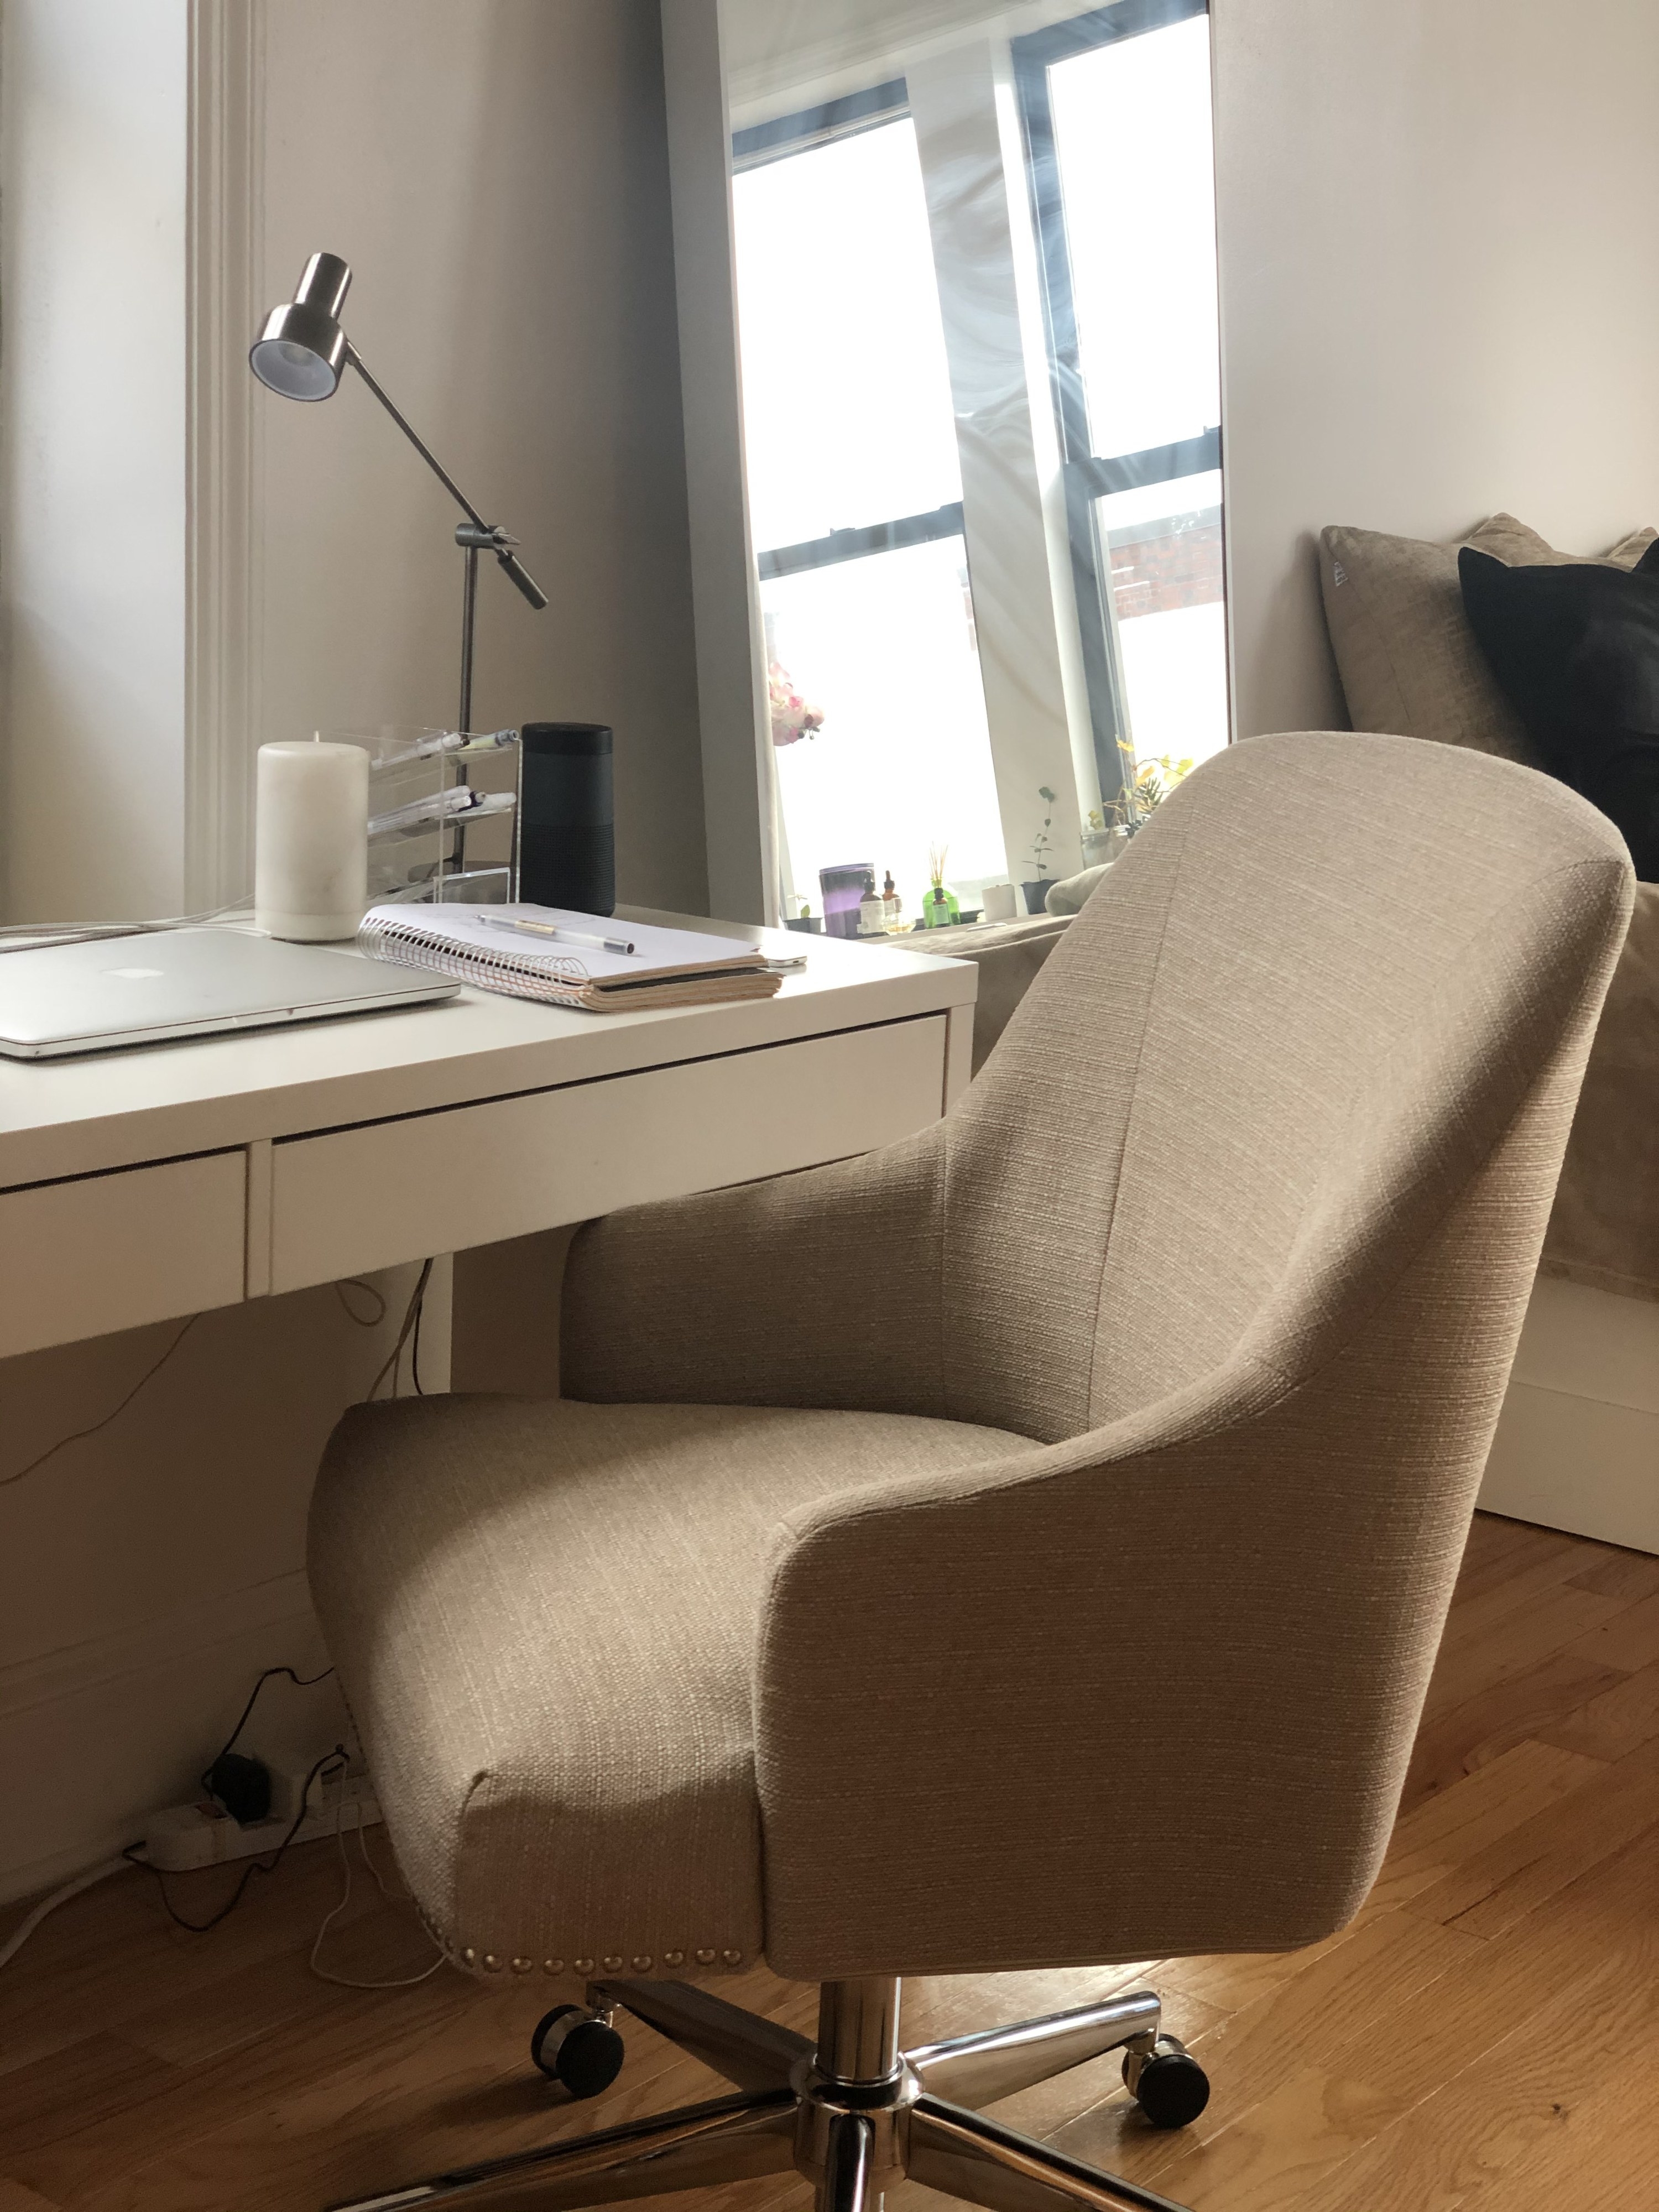 BuzzFeed writer&#x27;s chair in a brown-beige fabric with nailhead detailing around the bottom of the seat and metal rolling legs